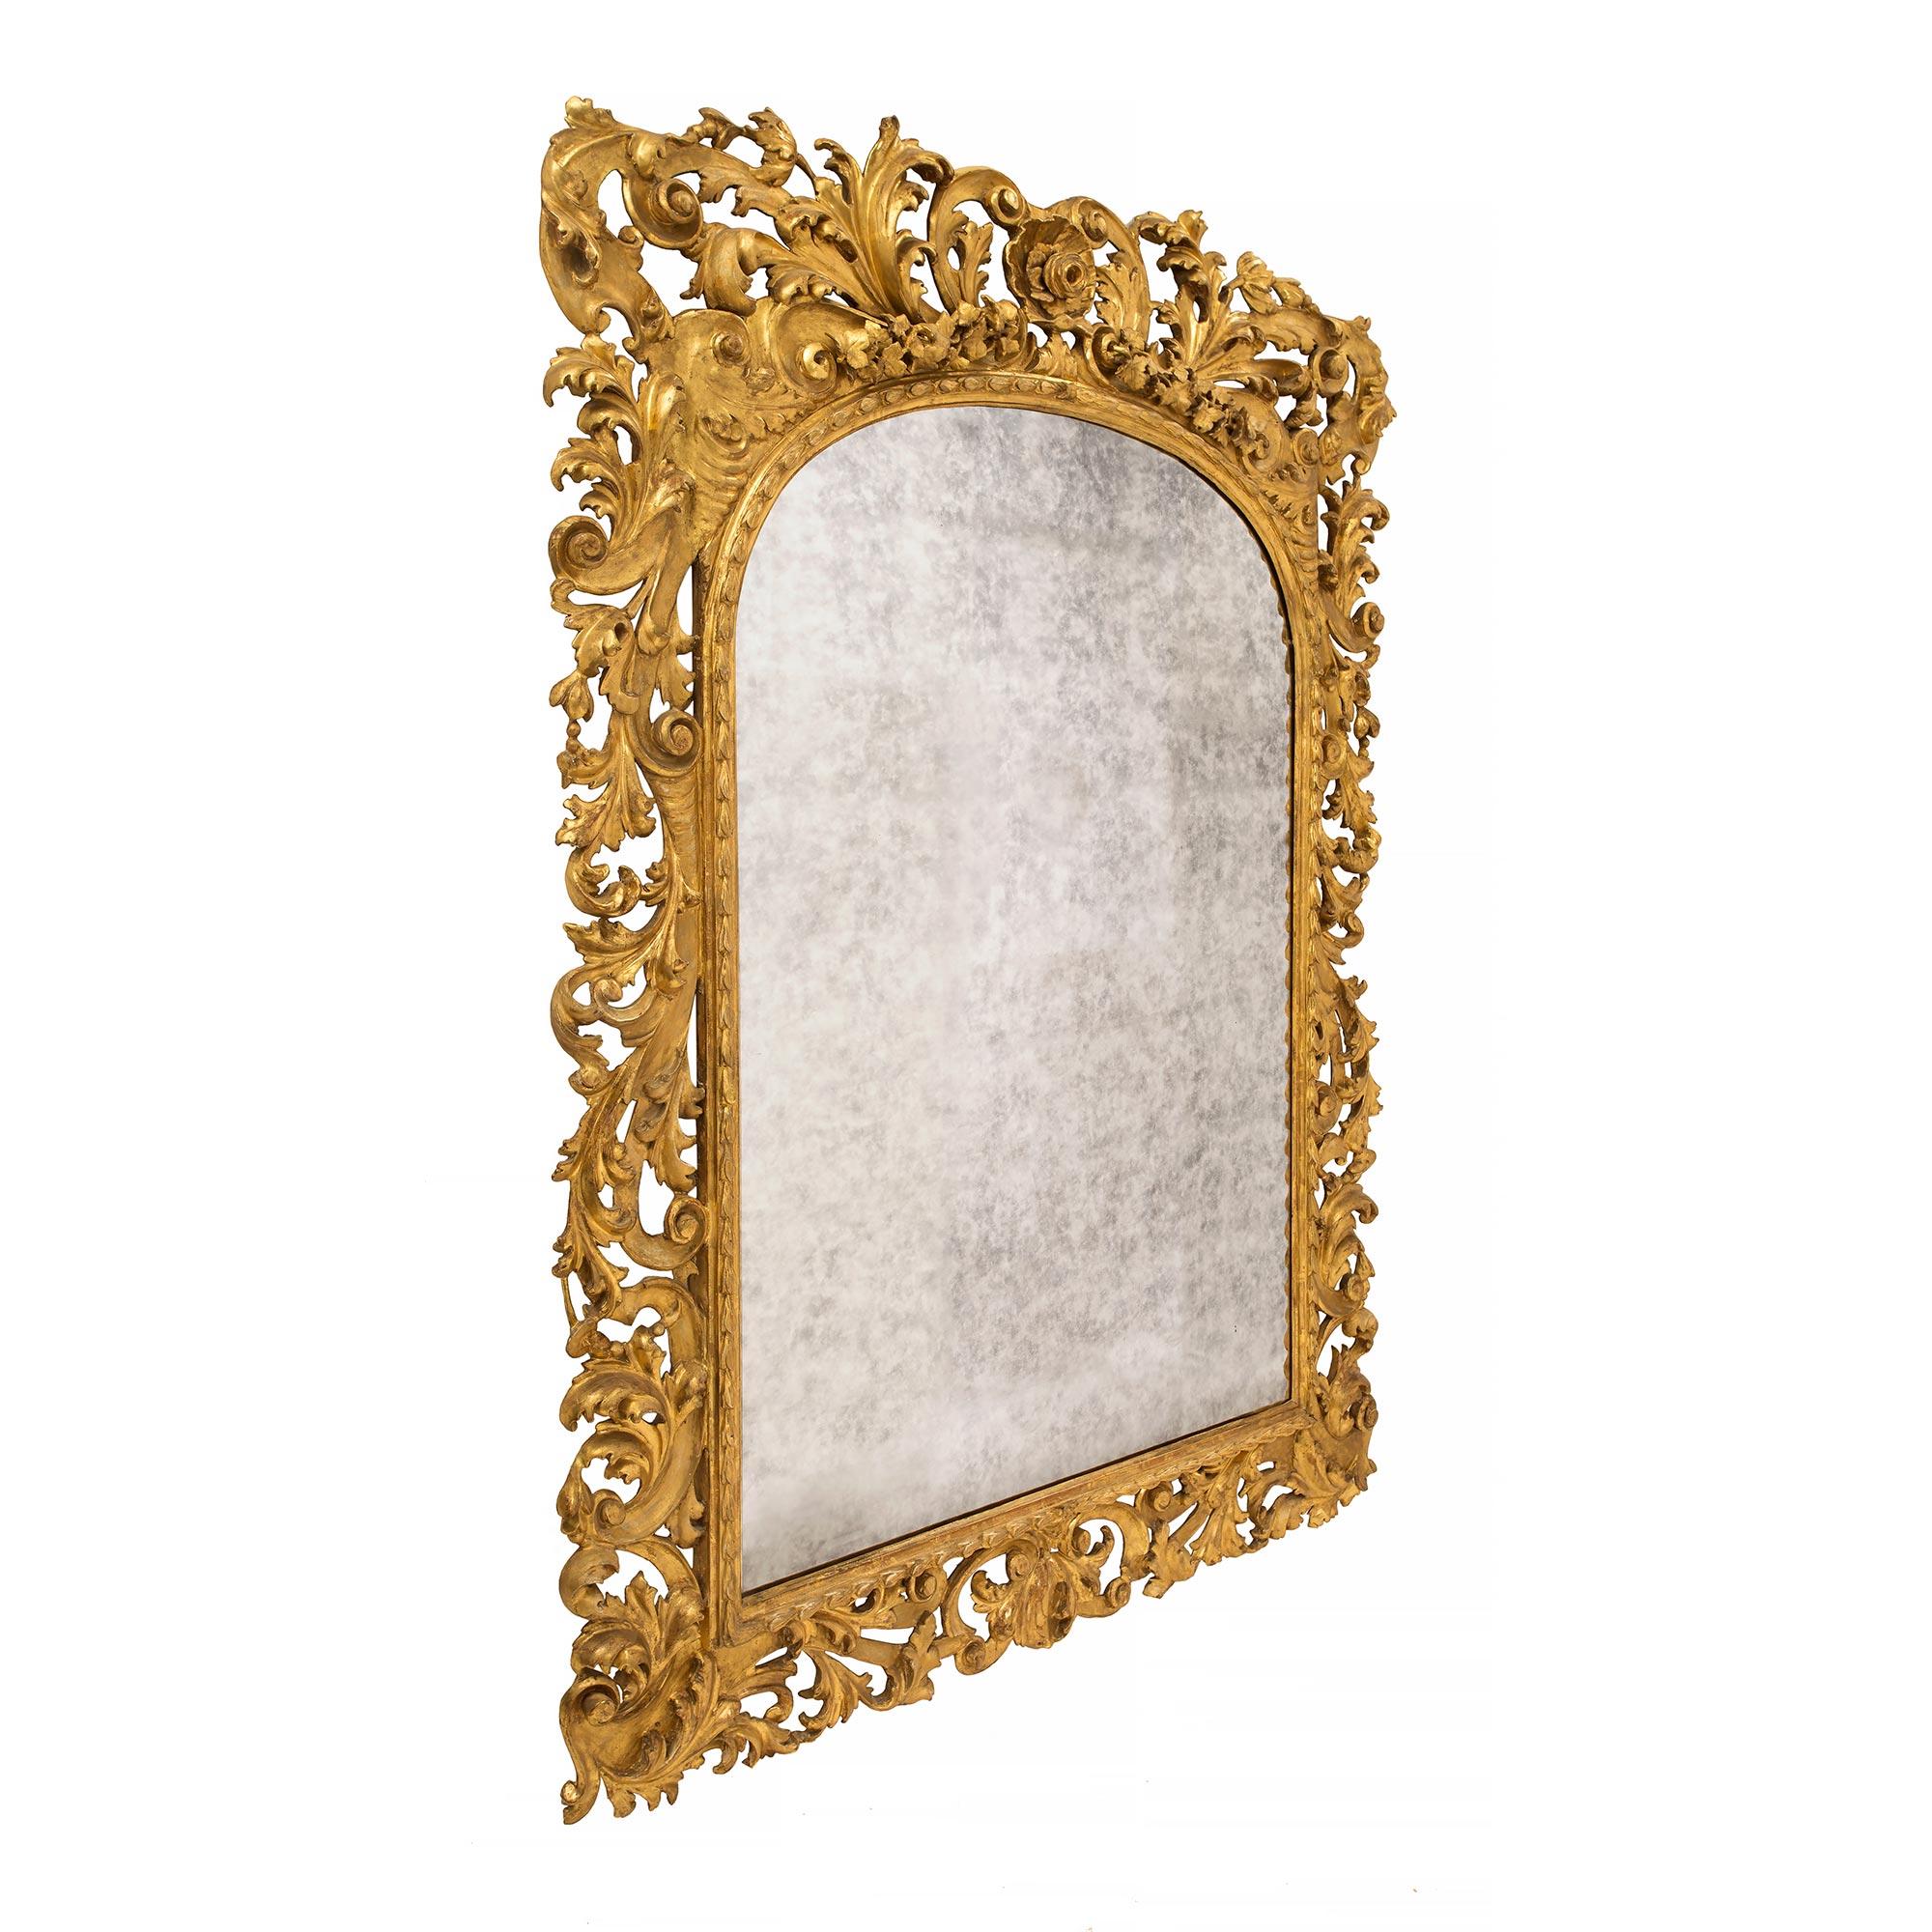 A spectacular Italian mid 19th century Baroque giltwood mirror. The mirror plate is surrounded by a heavily and richly carved pierced frame. The frame has wonderful 's' and 'c' scrolls throughout amidst impressive acanthus leaves. At the top is a